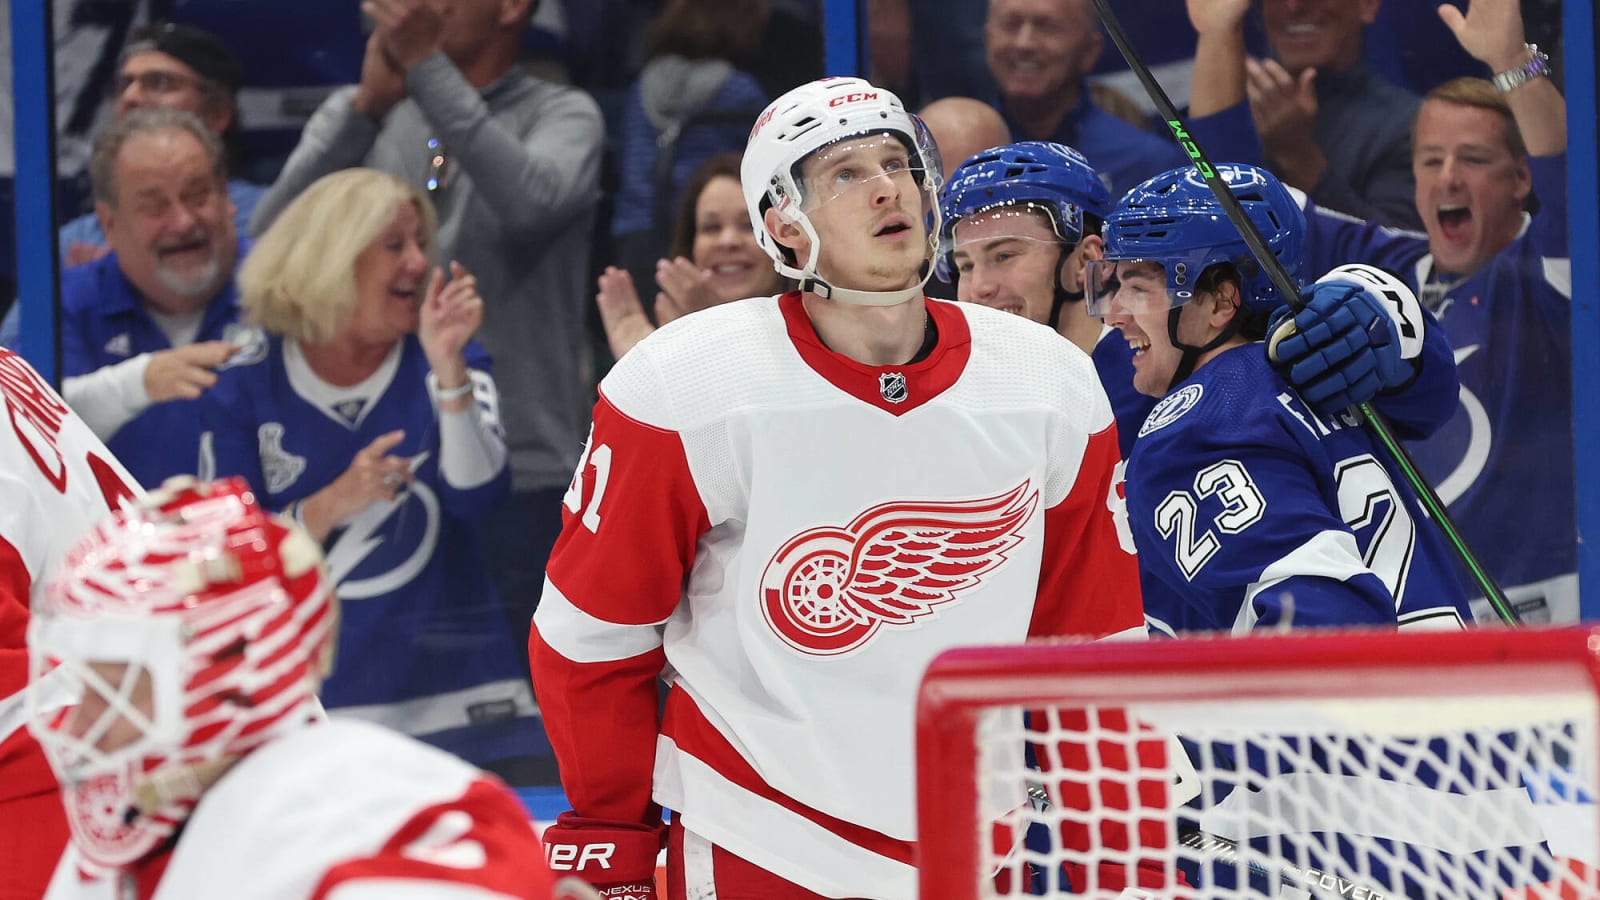 No Luck: Red Wings Stay at No. 9 For NHL Draft